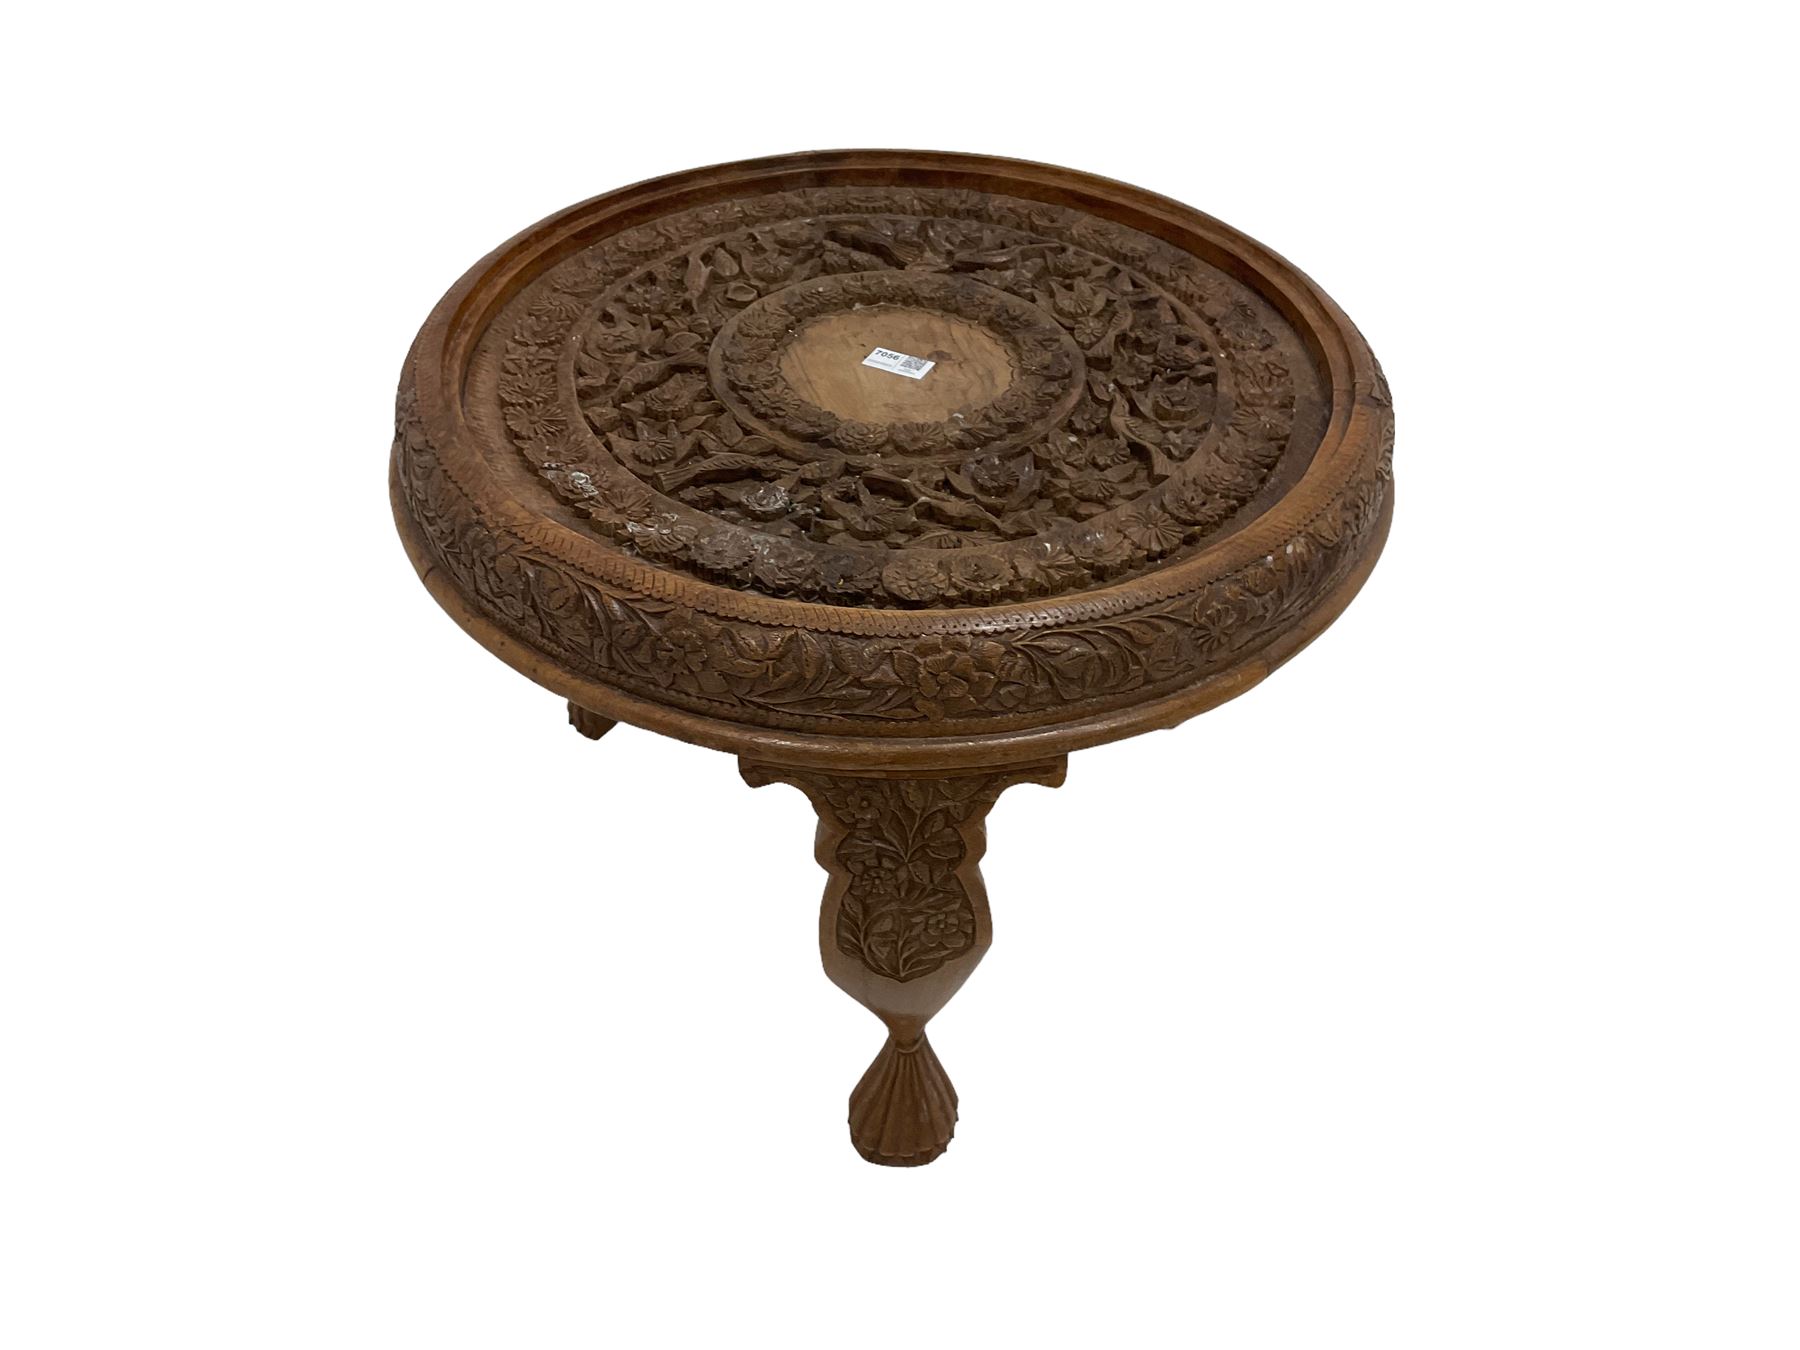 Early 20th century carved Burmese hardwood occasional table - Image 4 of 4